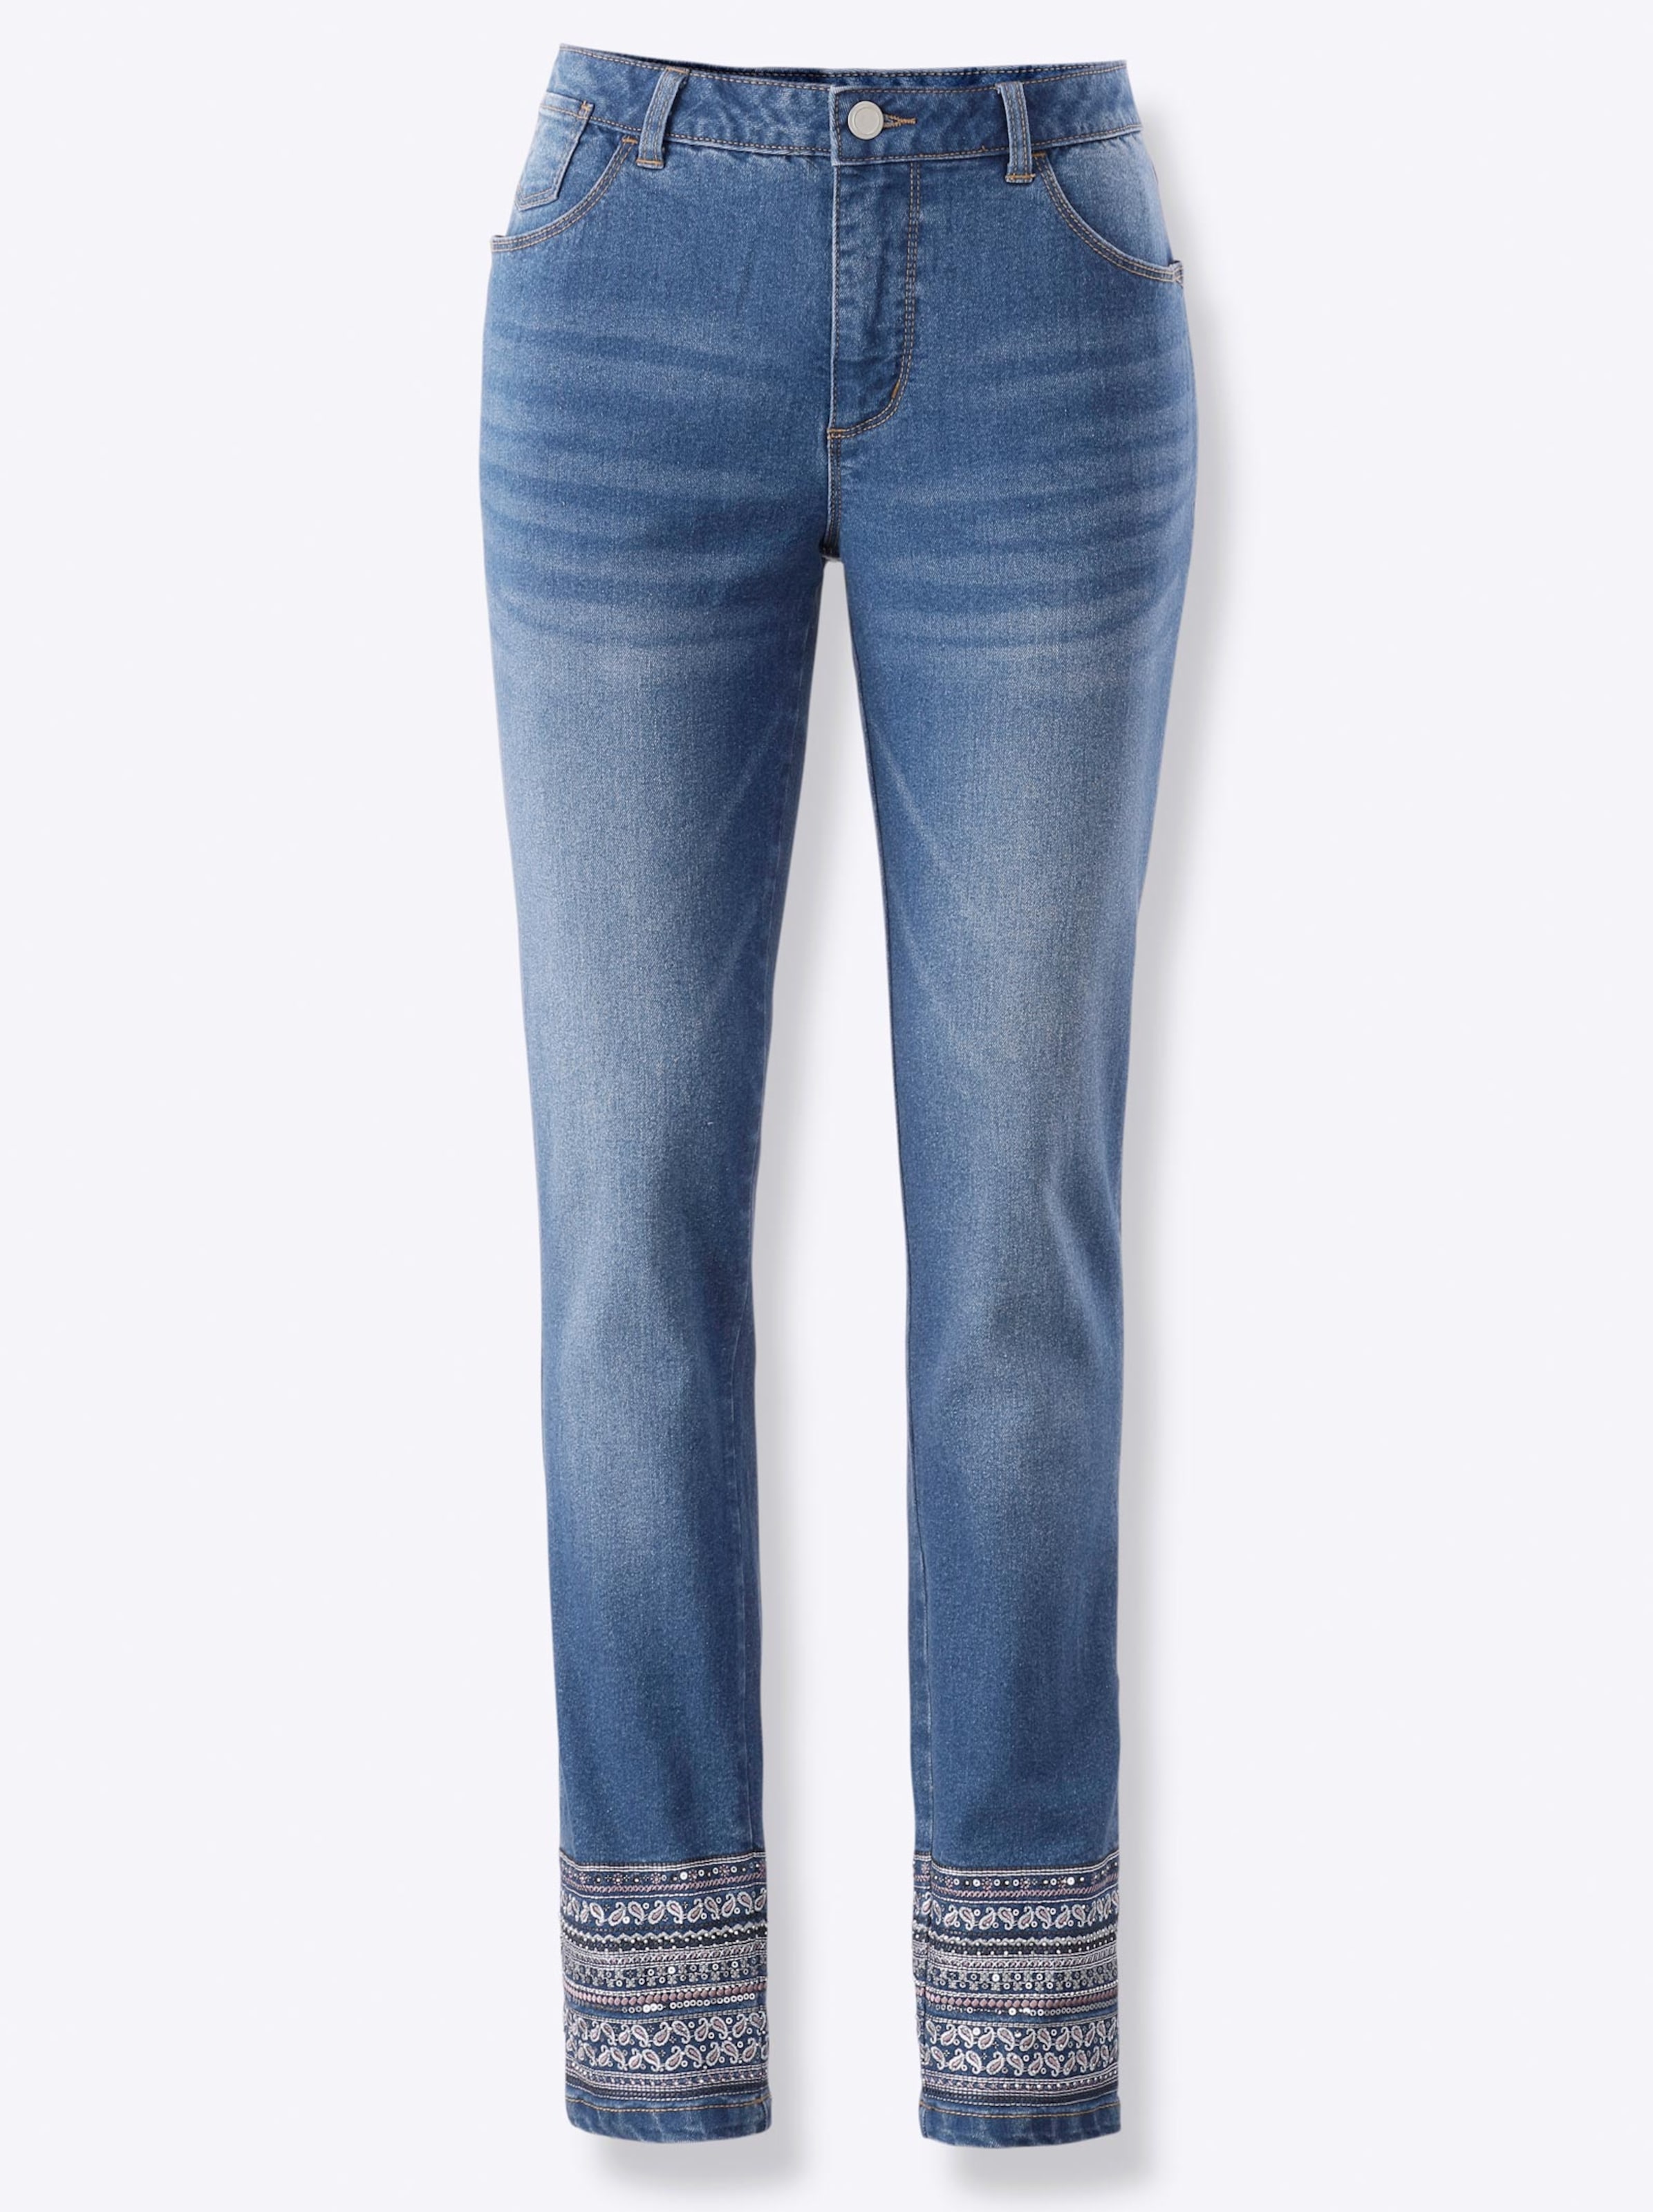 Damenmode Jeans Jeans in blue-stone-washed 